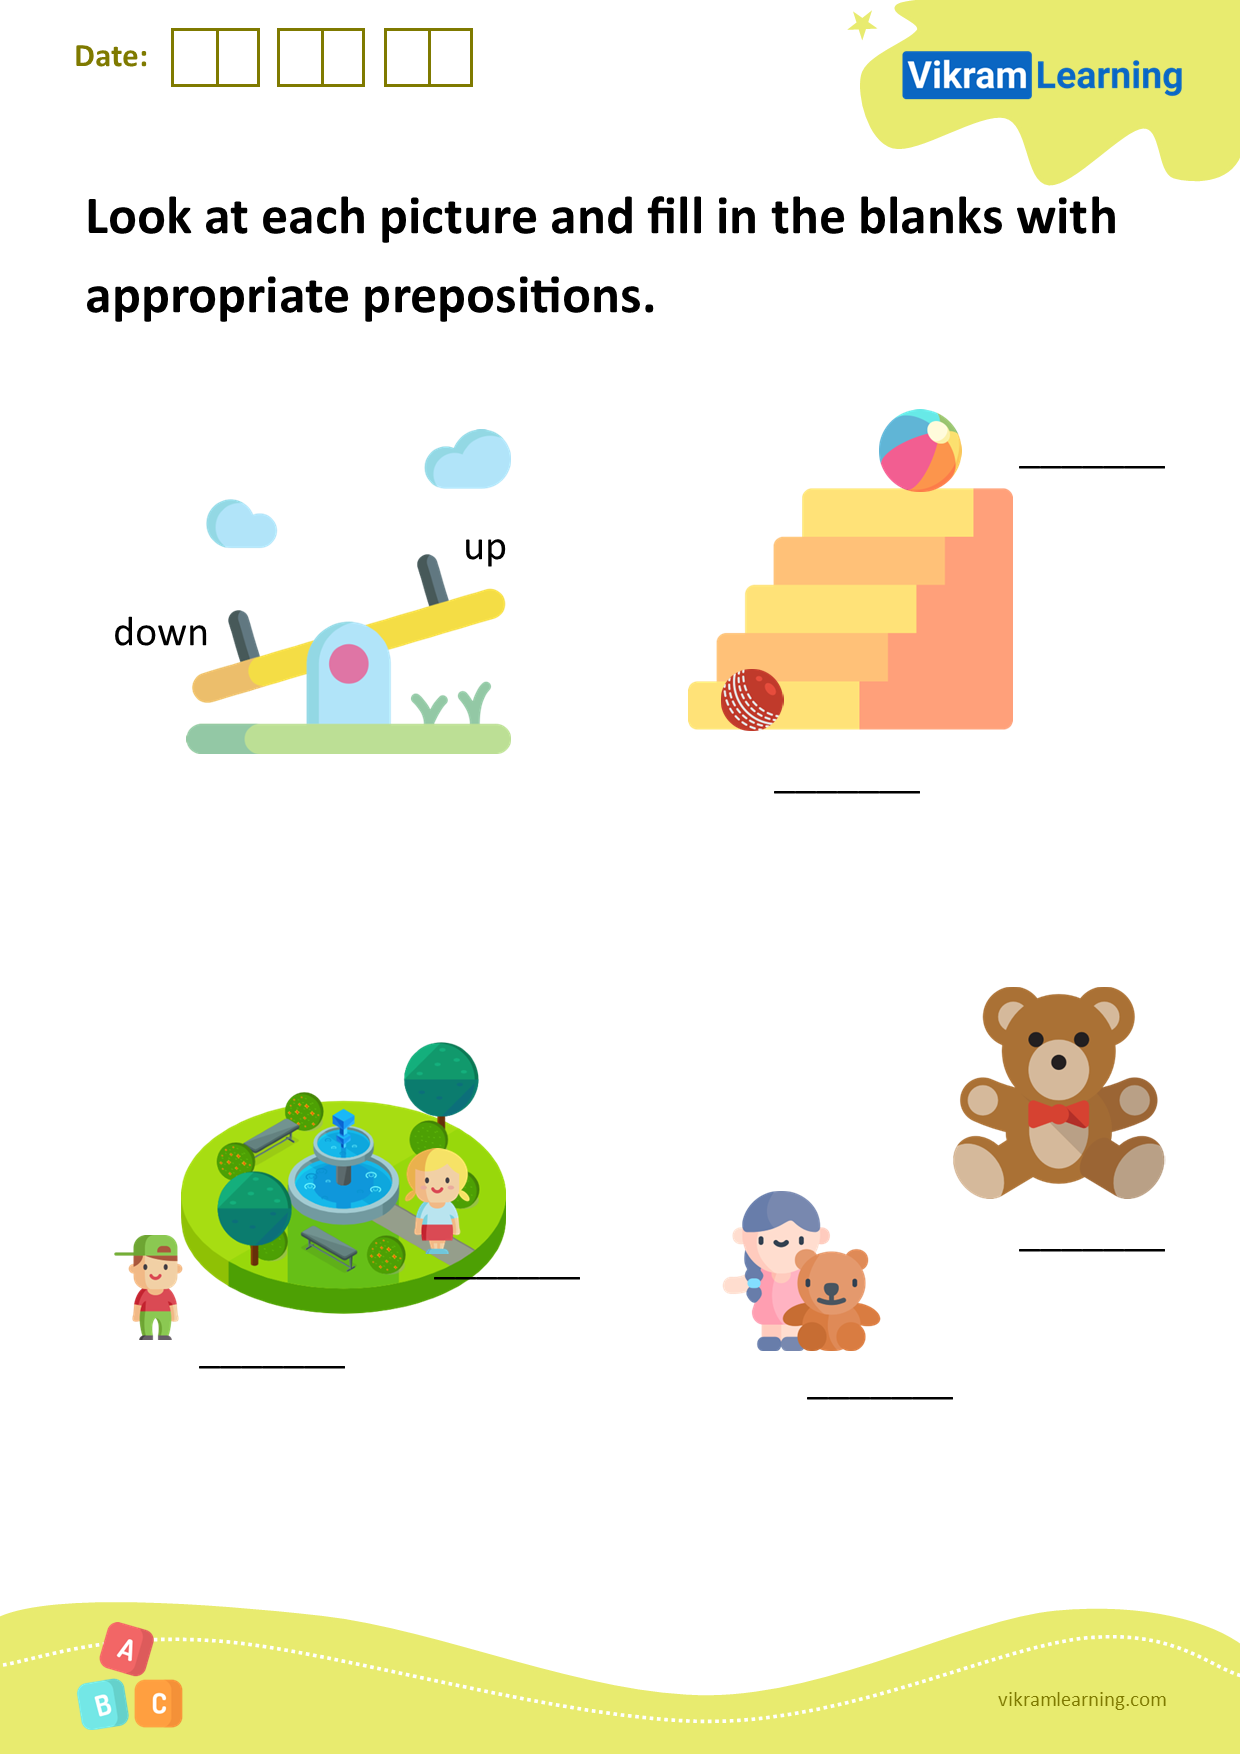 download-look-at-each-picture-and-fill-in-the-blanks-with-appropriate-prepositions-worksheets